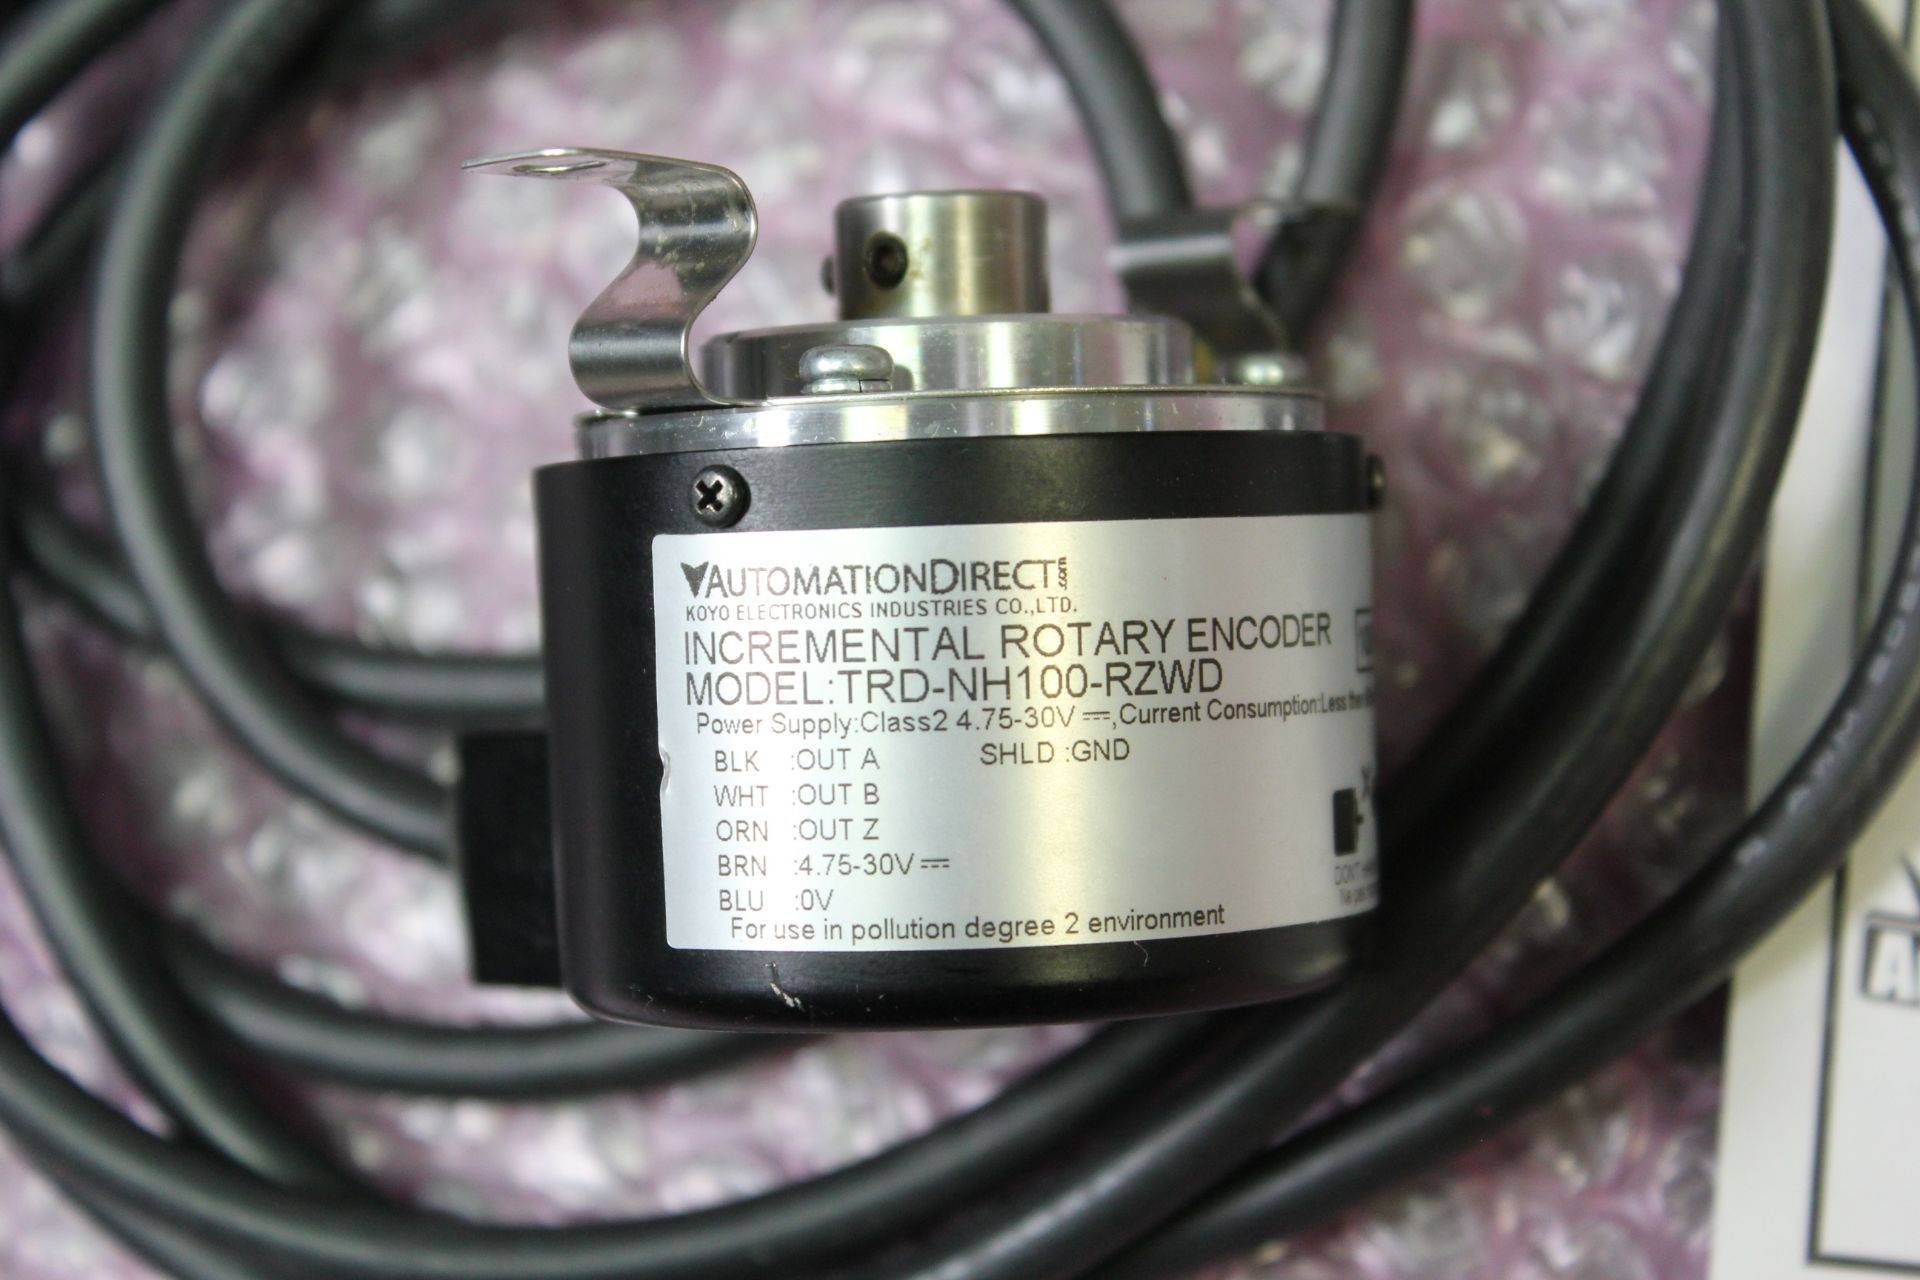 AUTOMATION DIRECT INCREMENTAL ROTARY ENCODER - Image 4 of 4